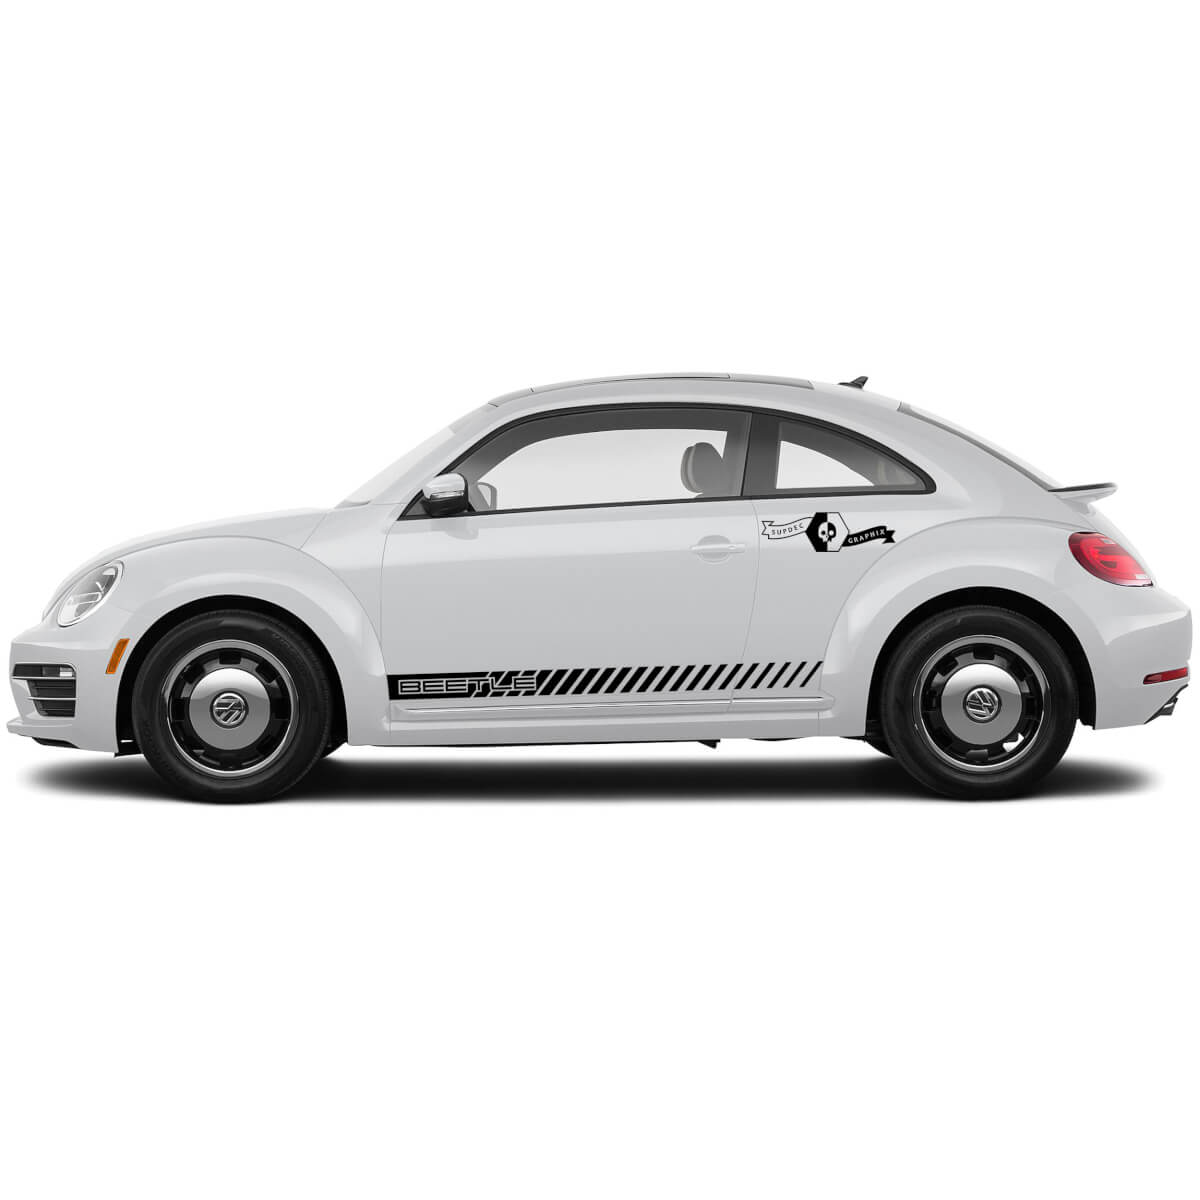 Pair Volkswagen Beetle rocker Stripe Graphics Decals Cabrio style fit any year  oblique lines